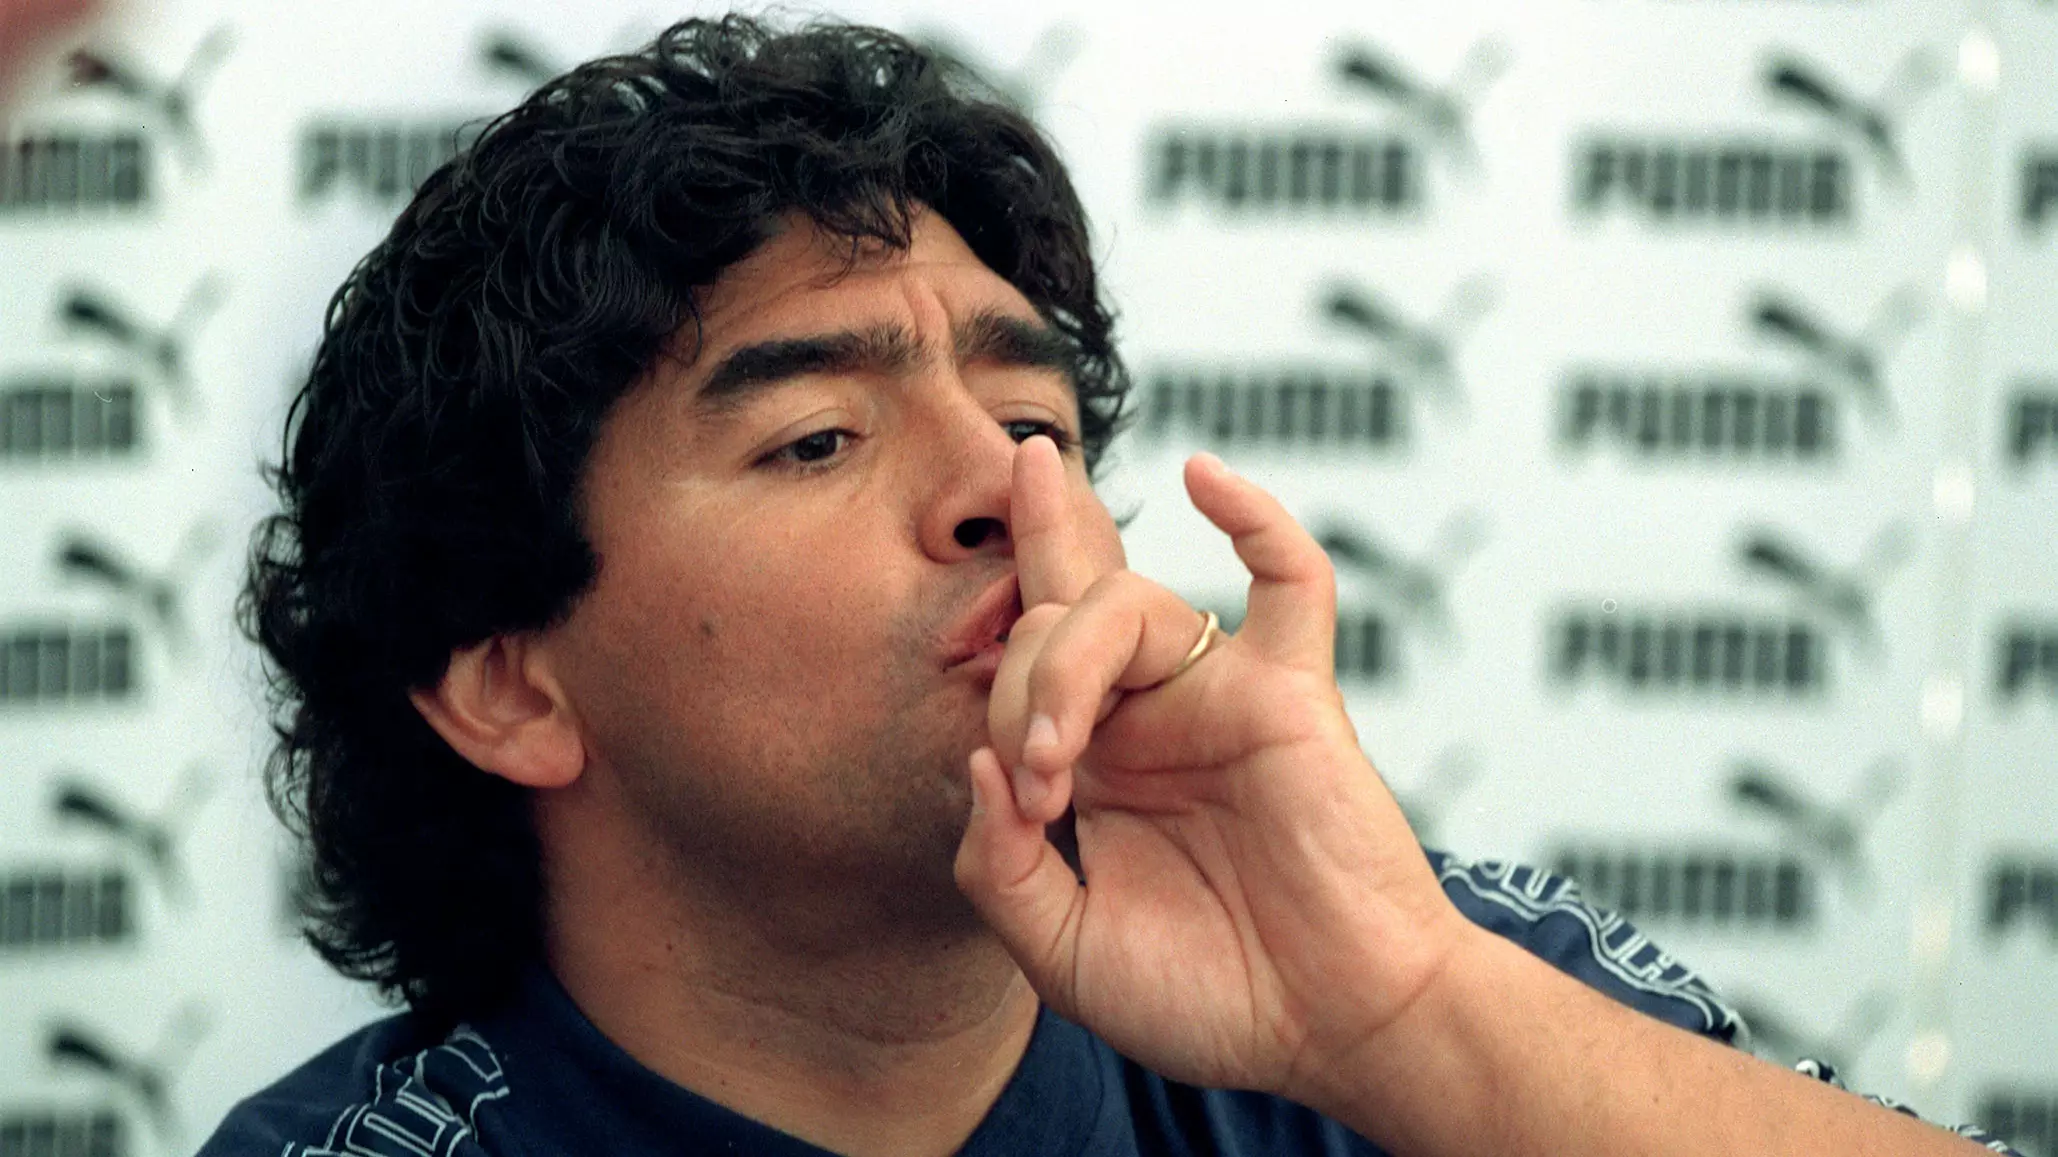 Diego Maradona Told Pope To Sell Vatican's Gold Ceilings To Help Poor